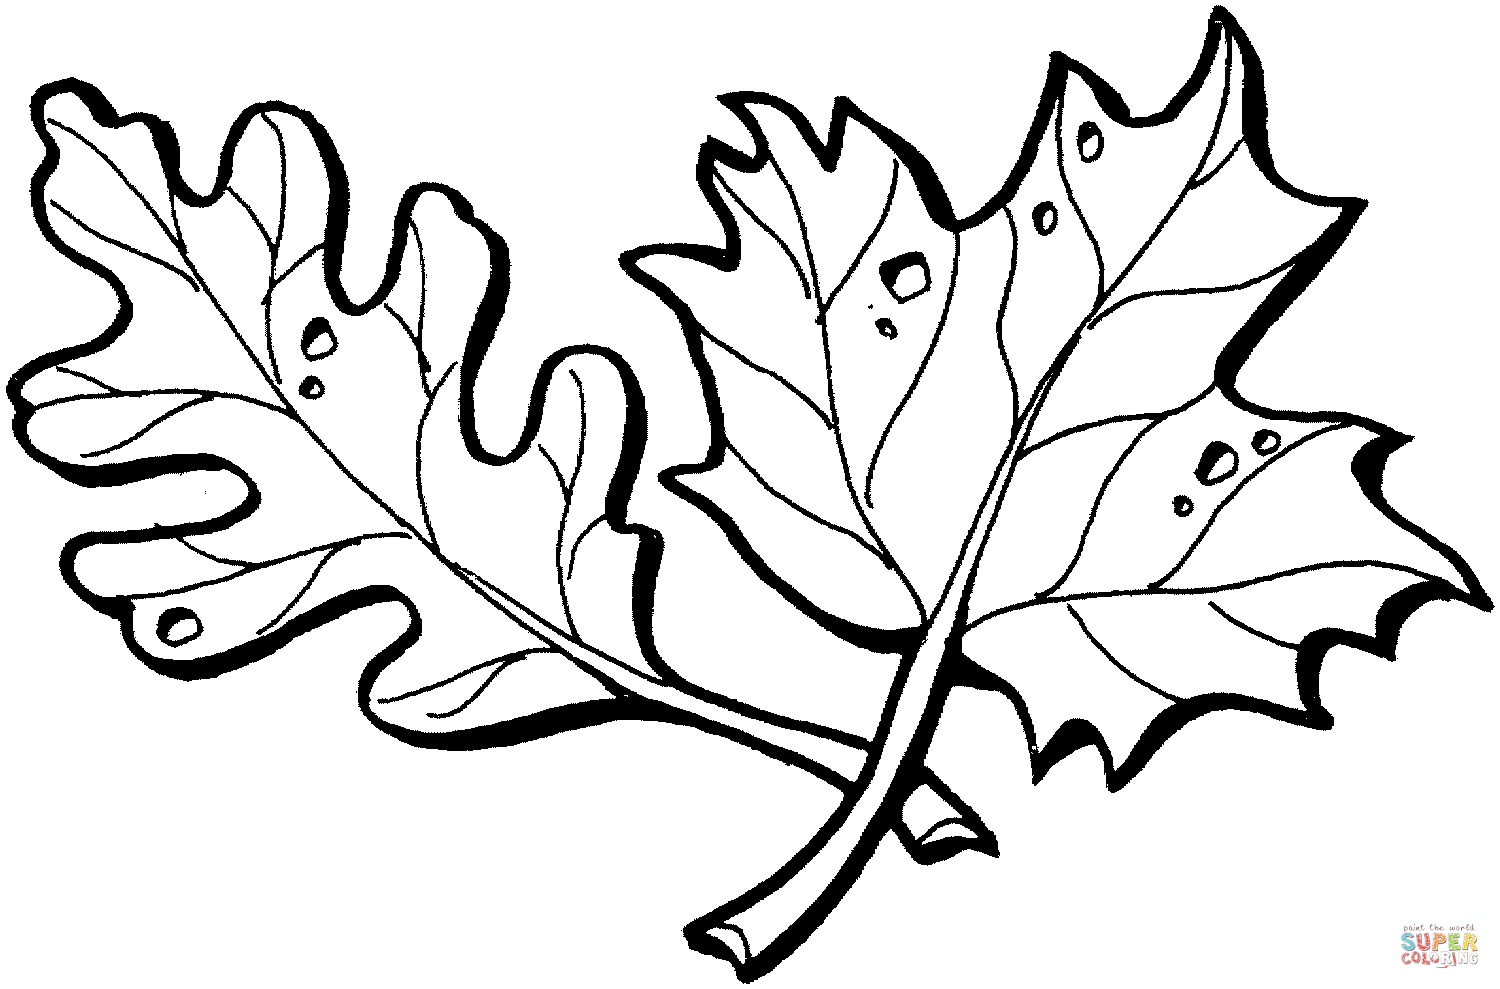 Oak and Maple leaves coloring page | Free Printable Coloring Pages